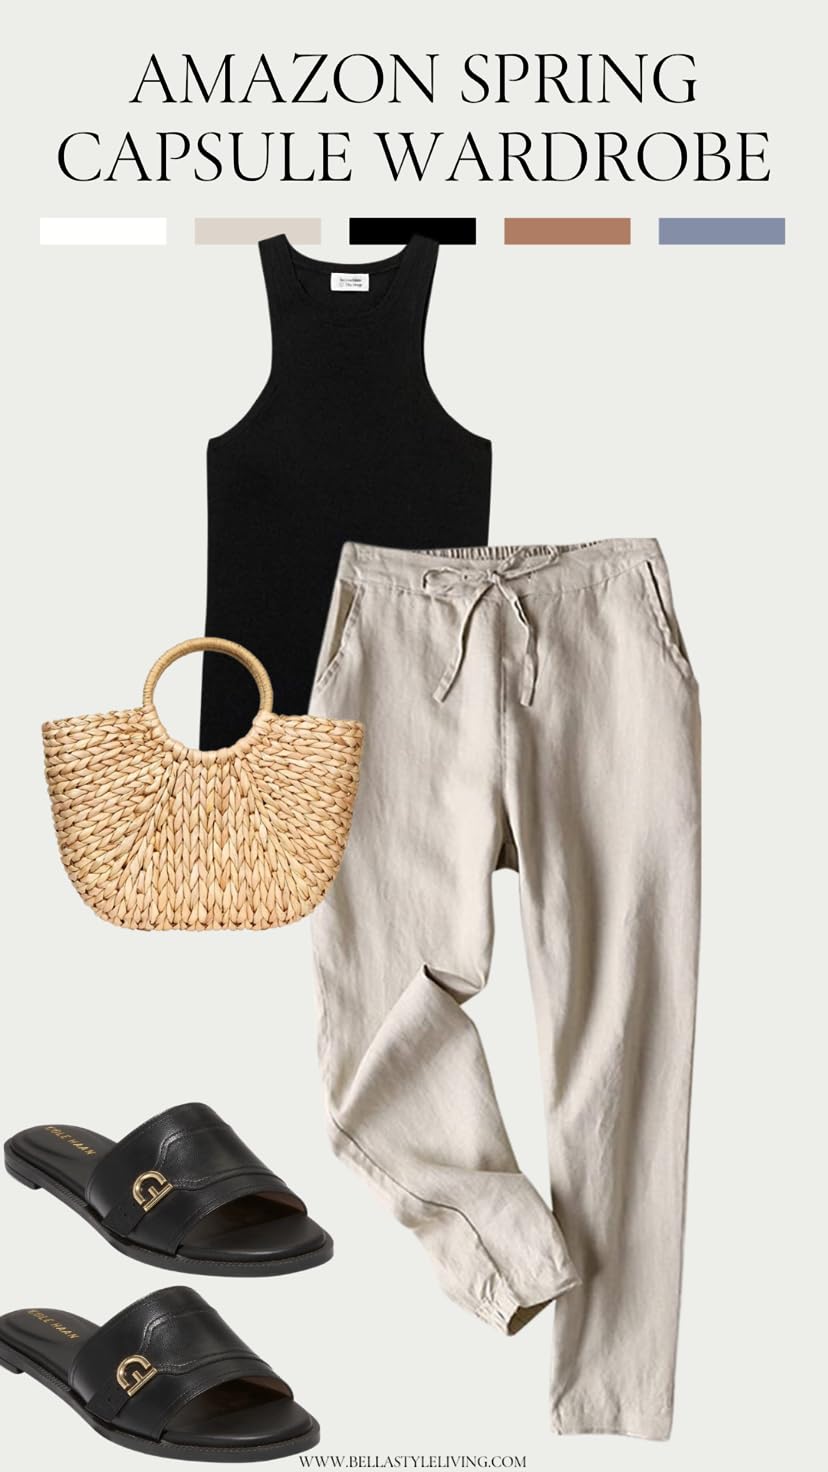 Amazon Spring Capsule Wardrobe finds. Love these linen pants paired with a sleeveless tank and slides. So cute and comfy.